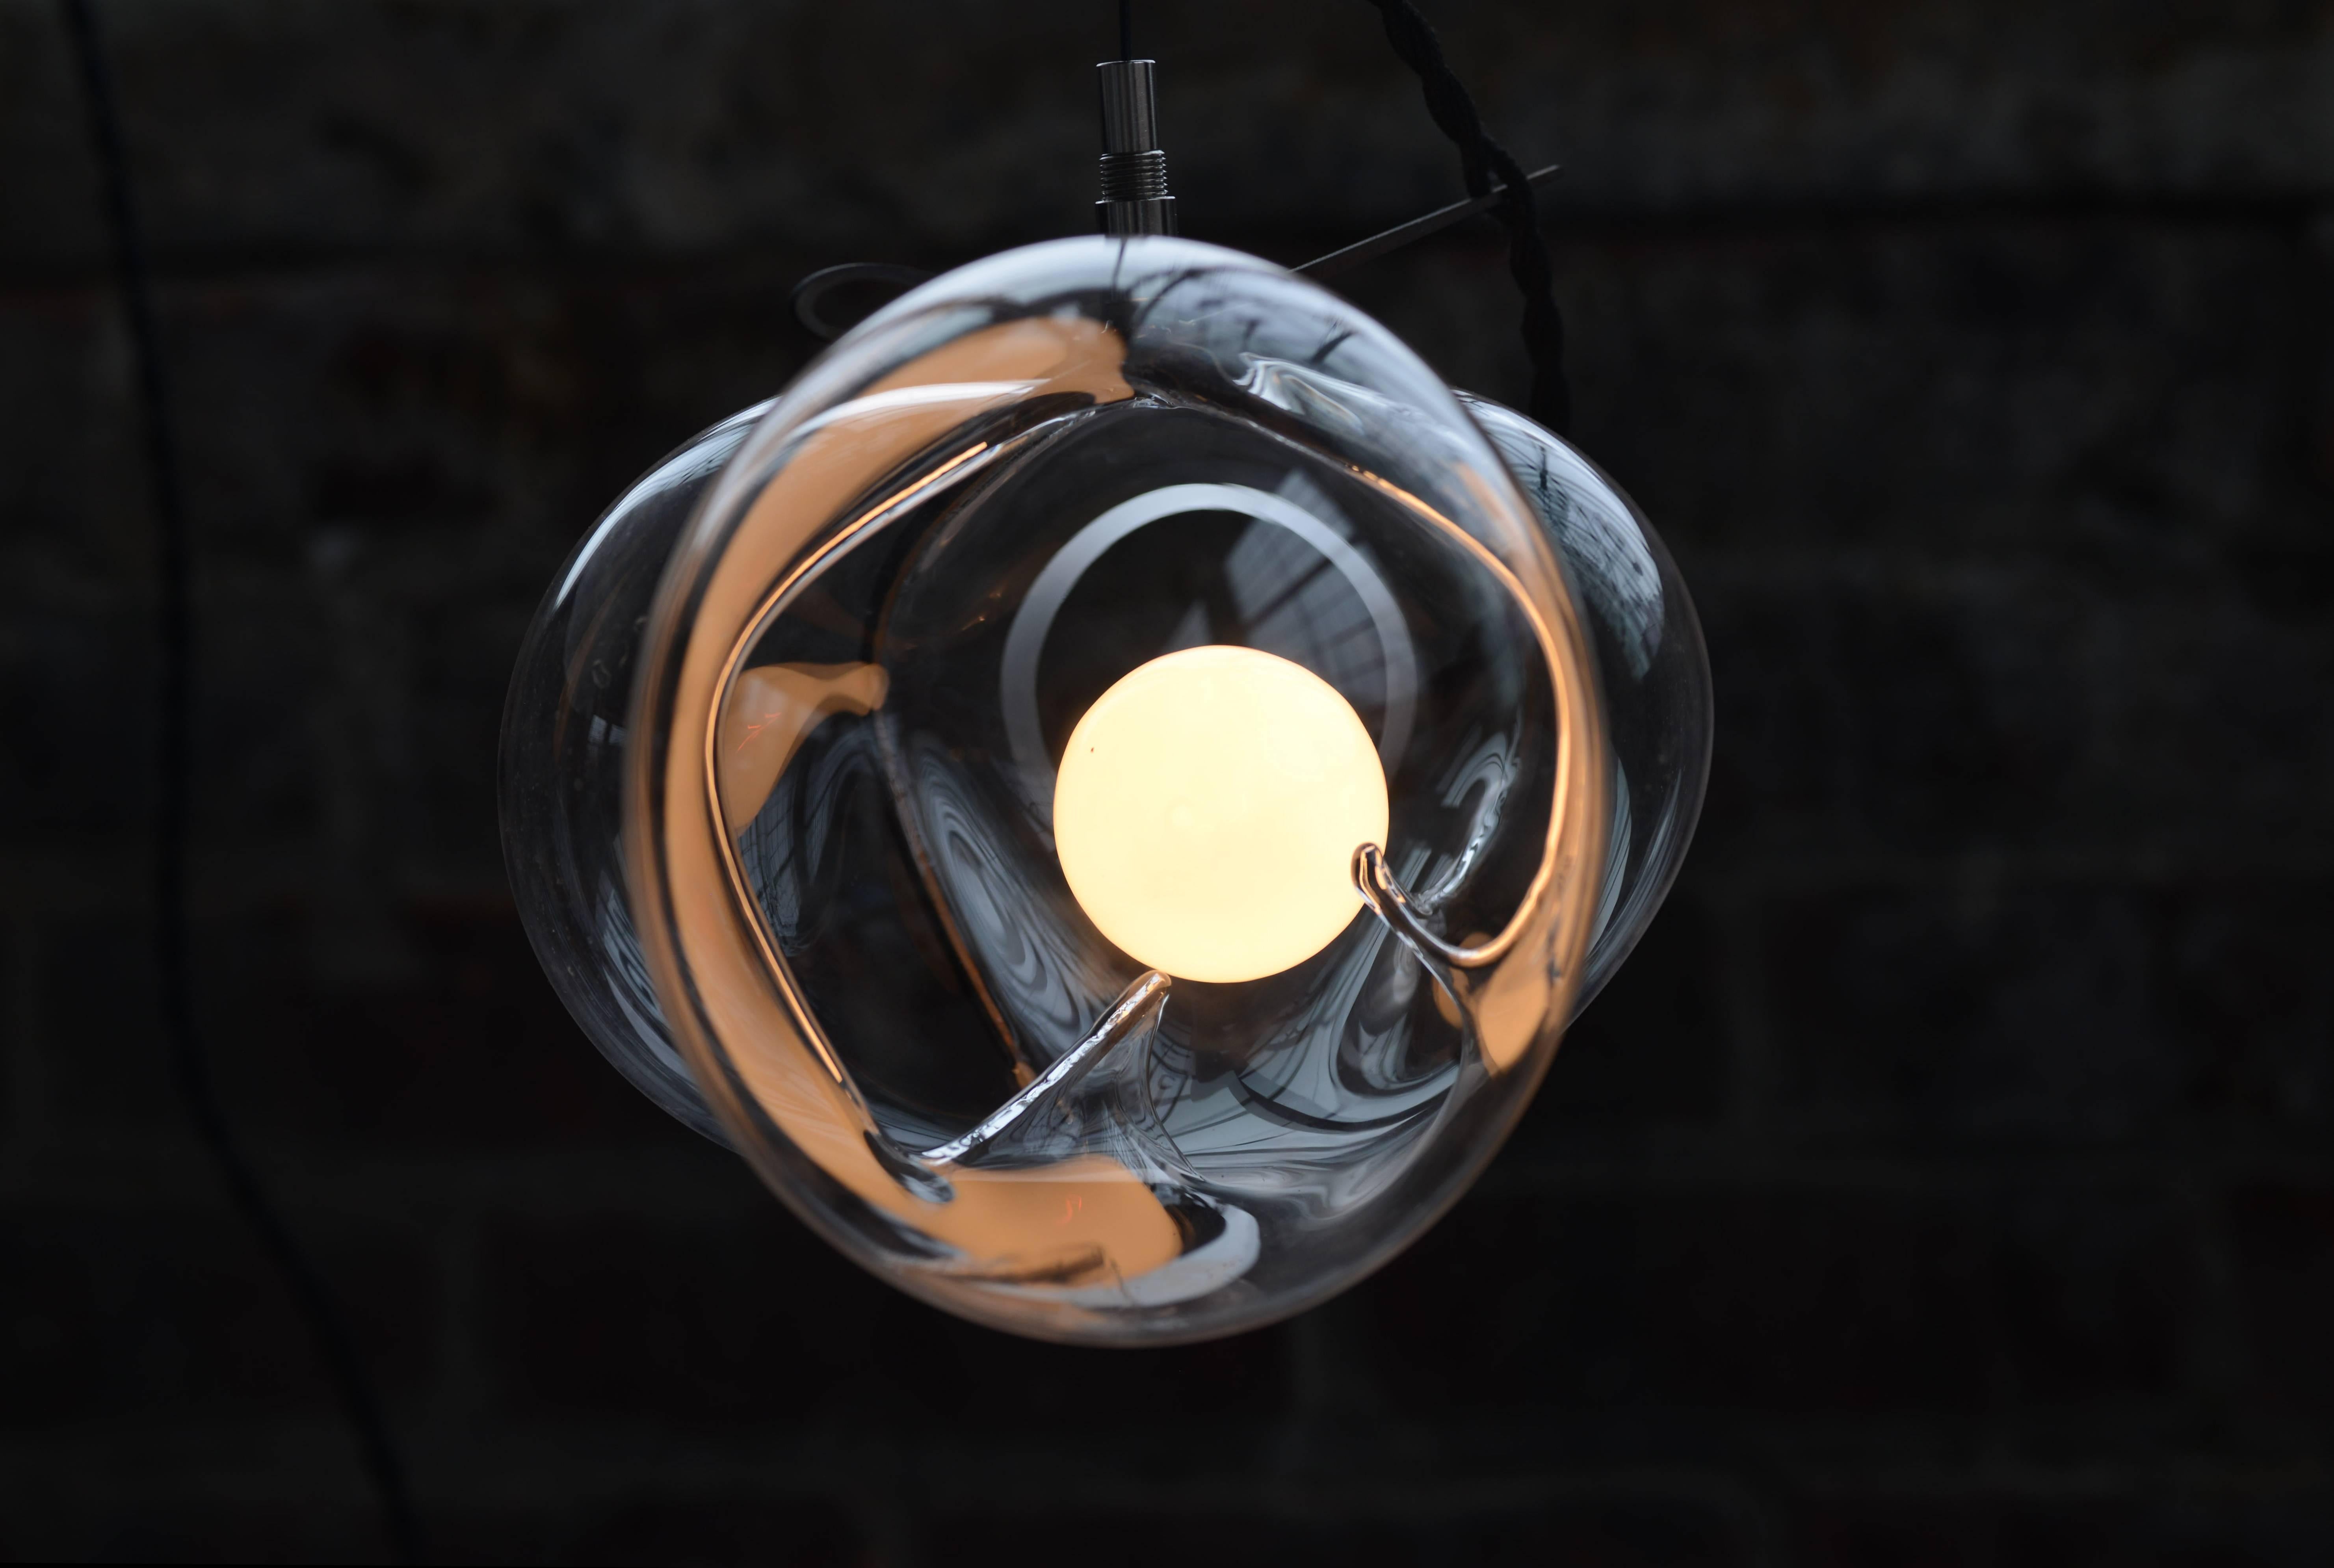 Crystal glass suspension, exhale by Catie Newell, WDSTCK Studio
Measures: Diameters 30 cm
Materials: Crystal glass, stainless steel.

Exhale skilfully encases a single blow of glass within
a rigid metal structure. The metal form restricts